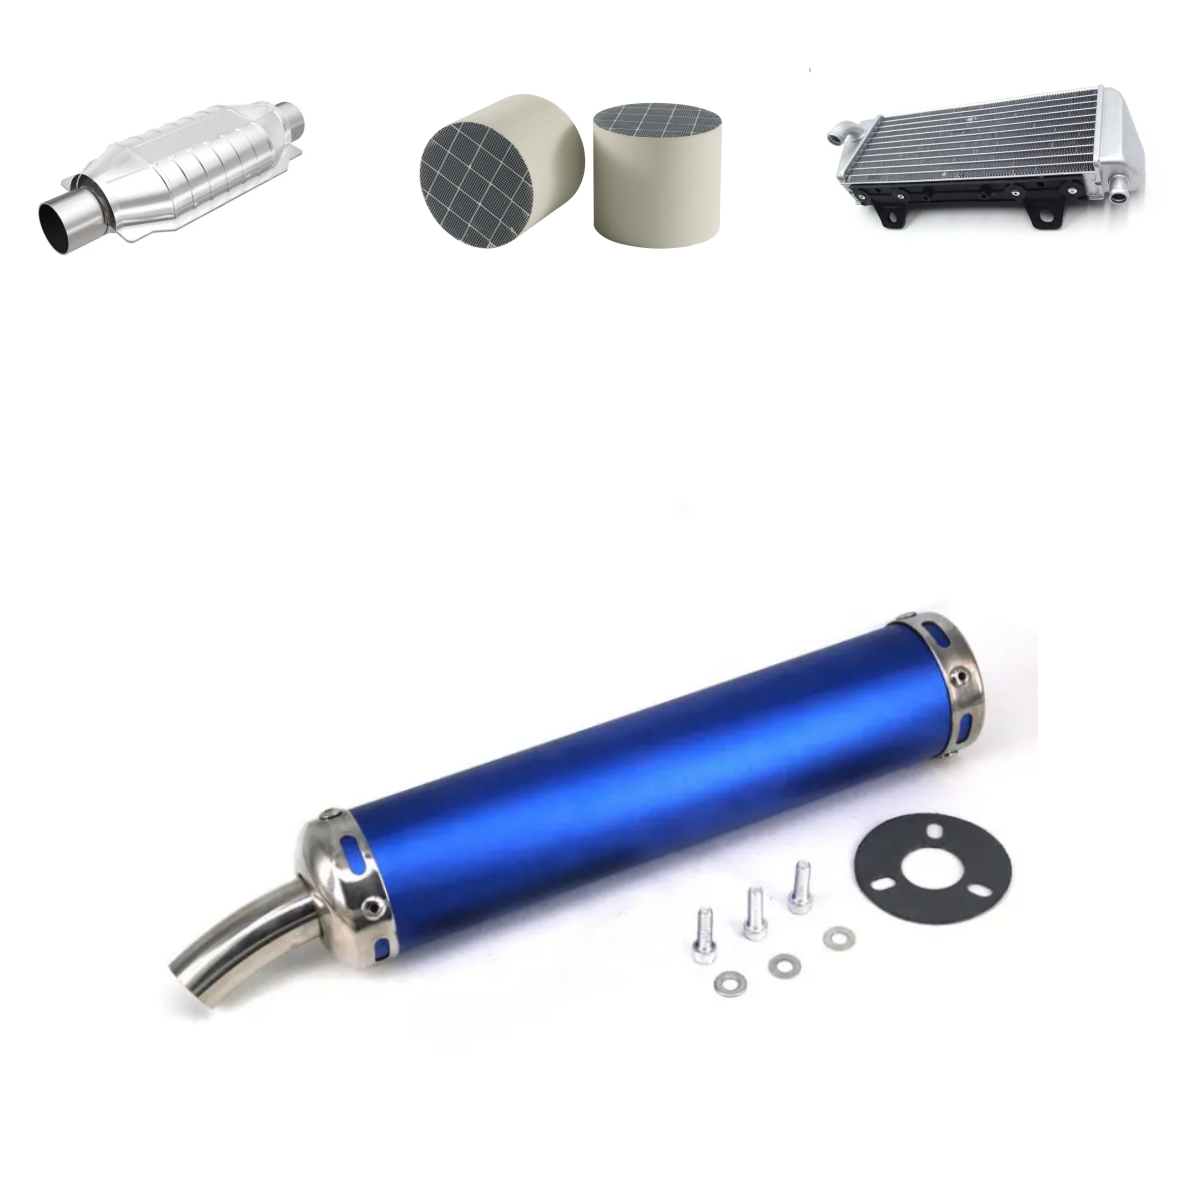 High Performance Silencer Motorcycle Parts Exhaust Muffler for Motorcycle Engine Featured Image